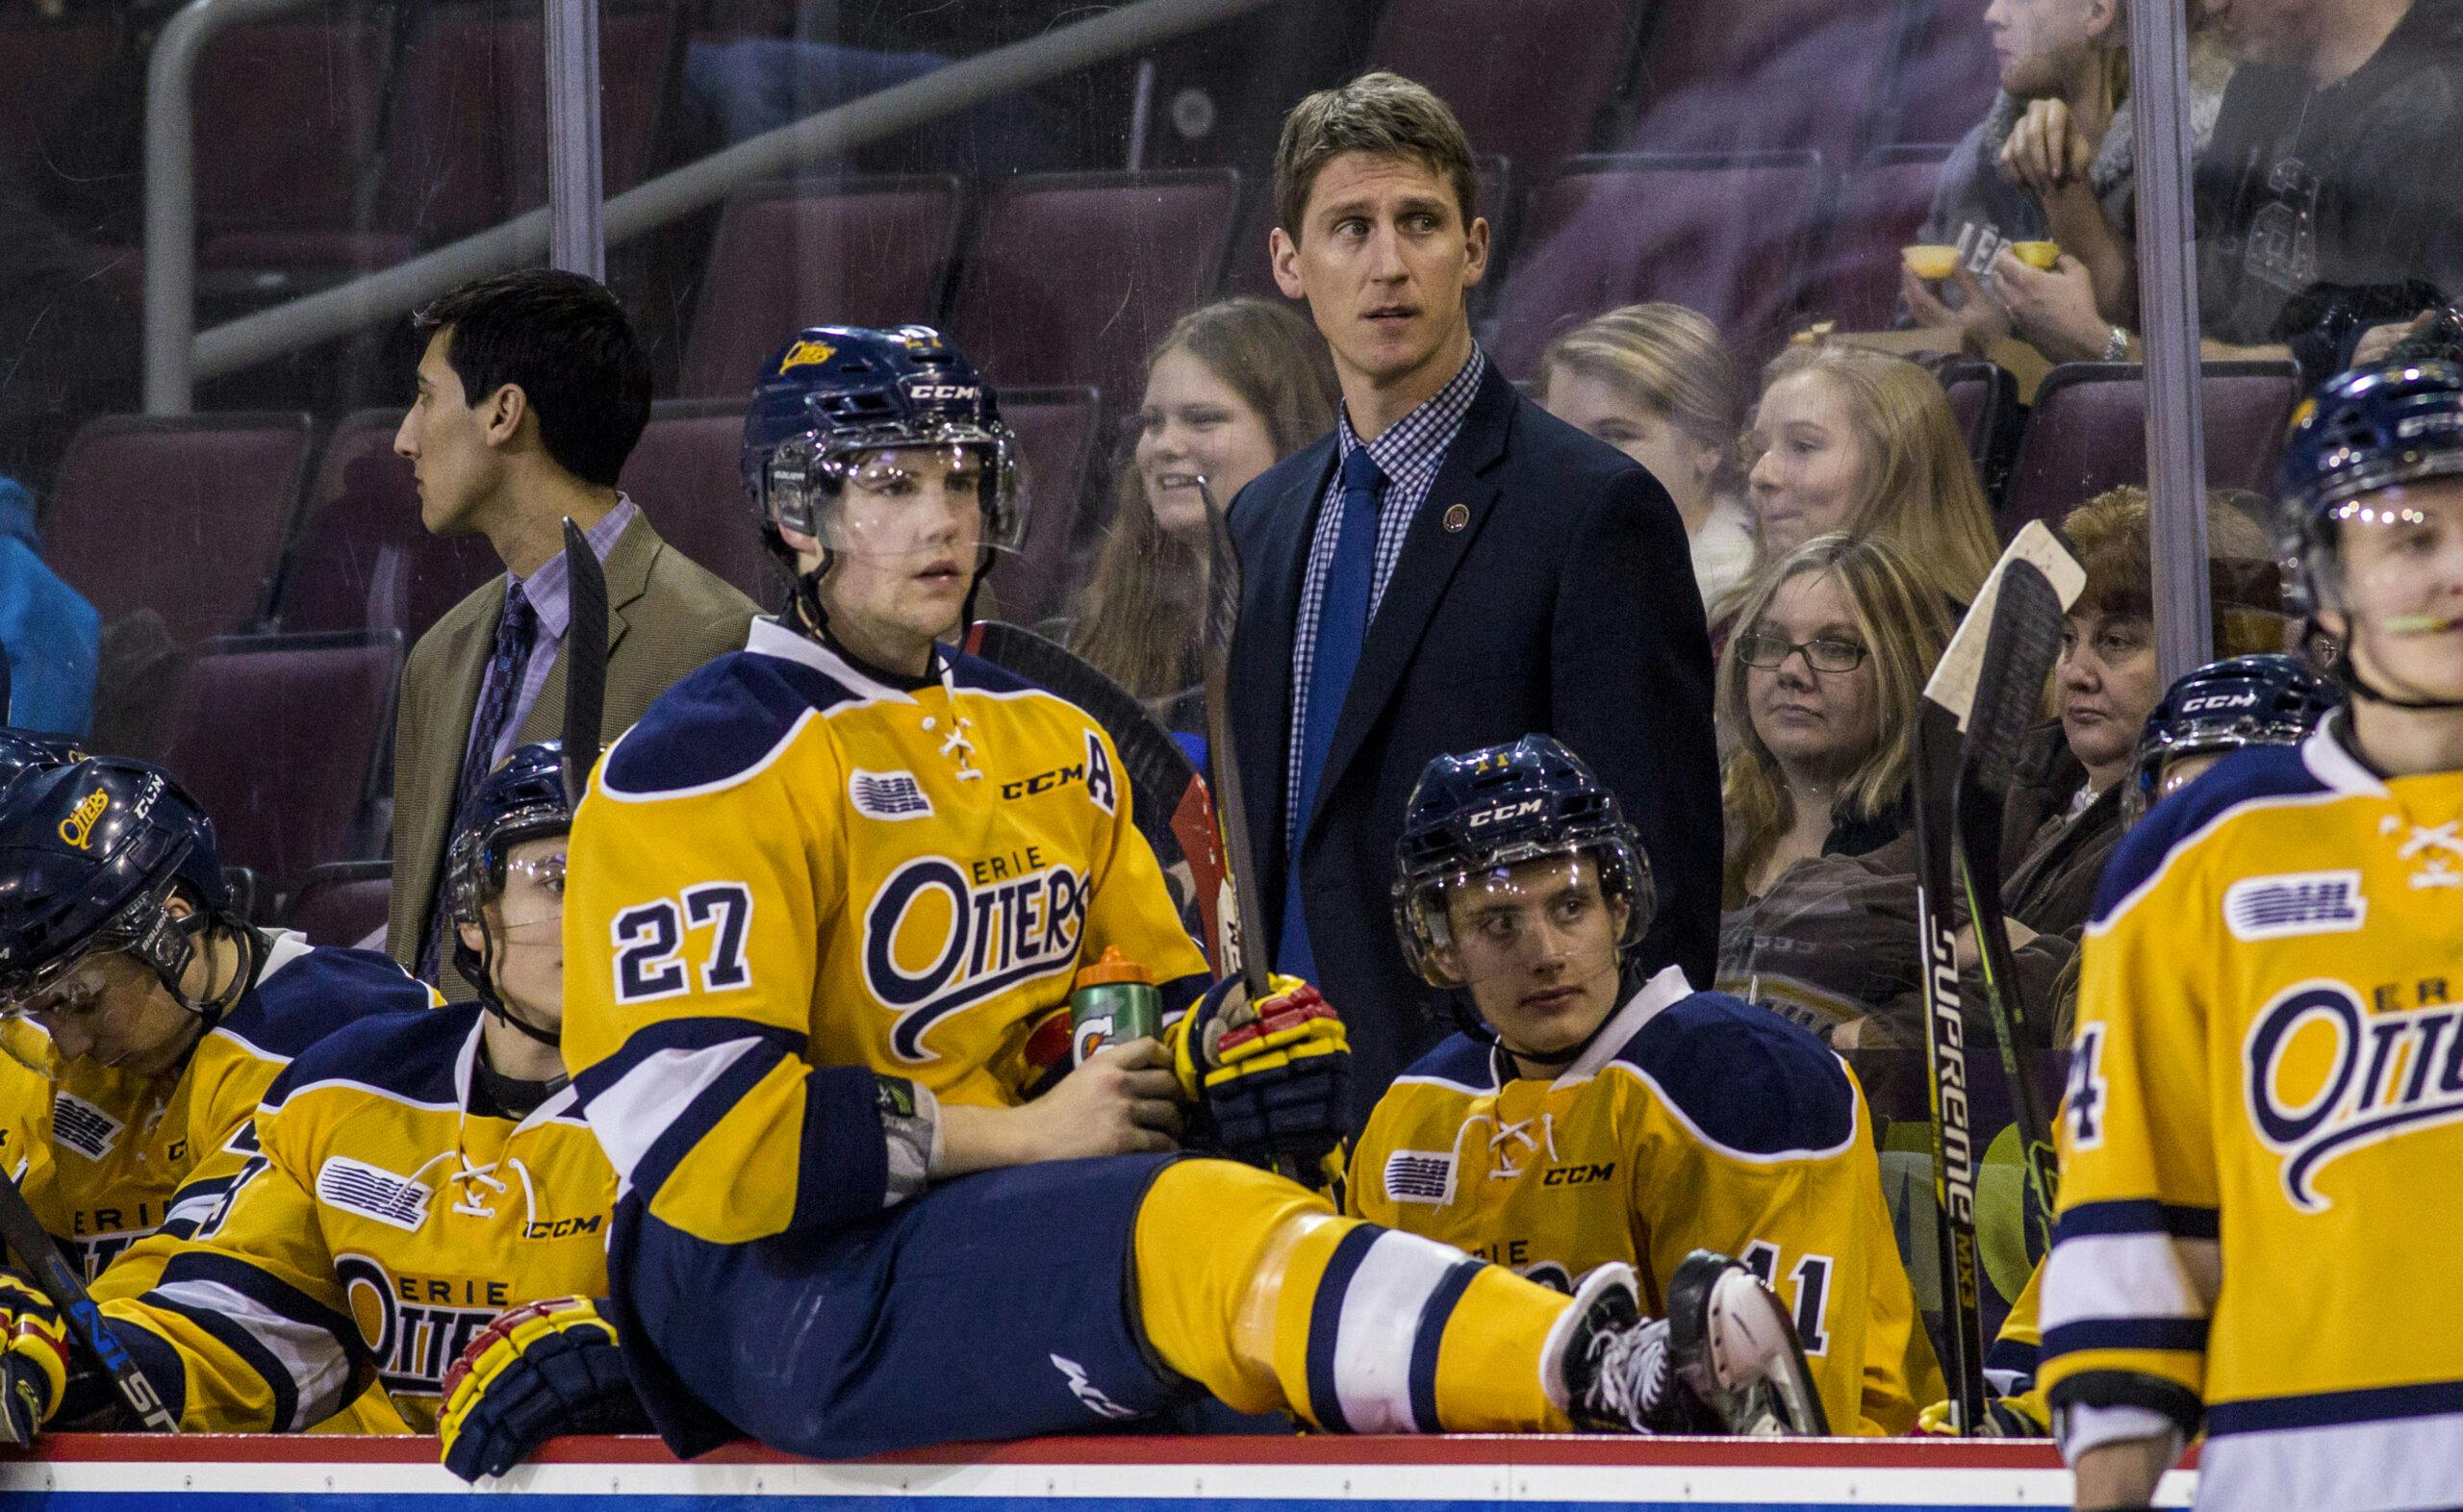 Kris Knoblauch, Connor McDavid’s coach from the OHL, will replace Jay